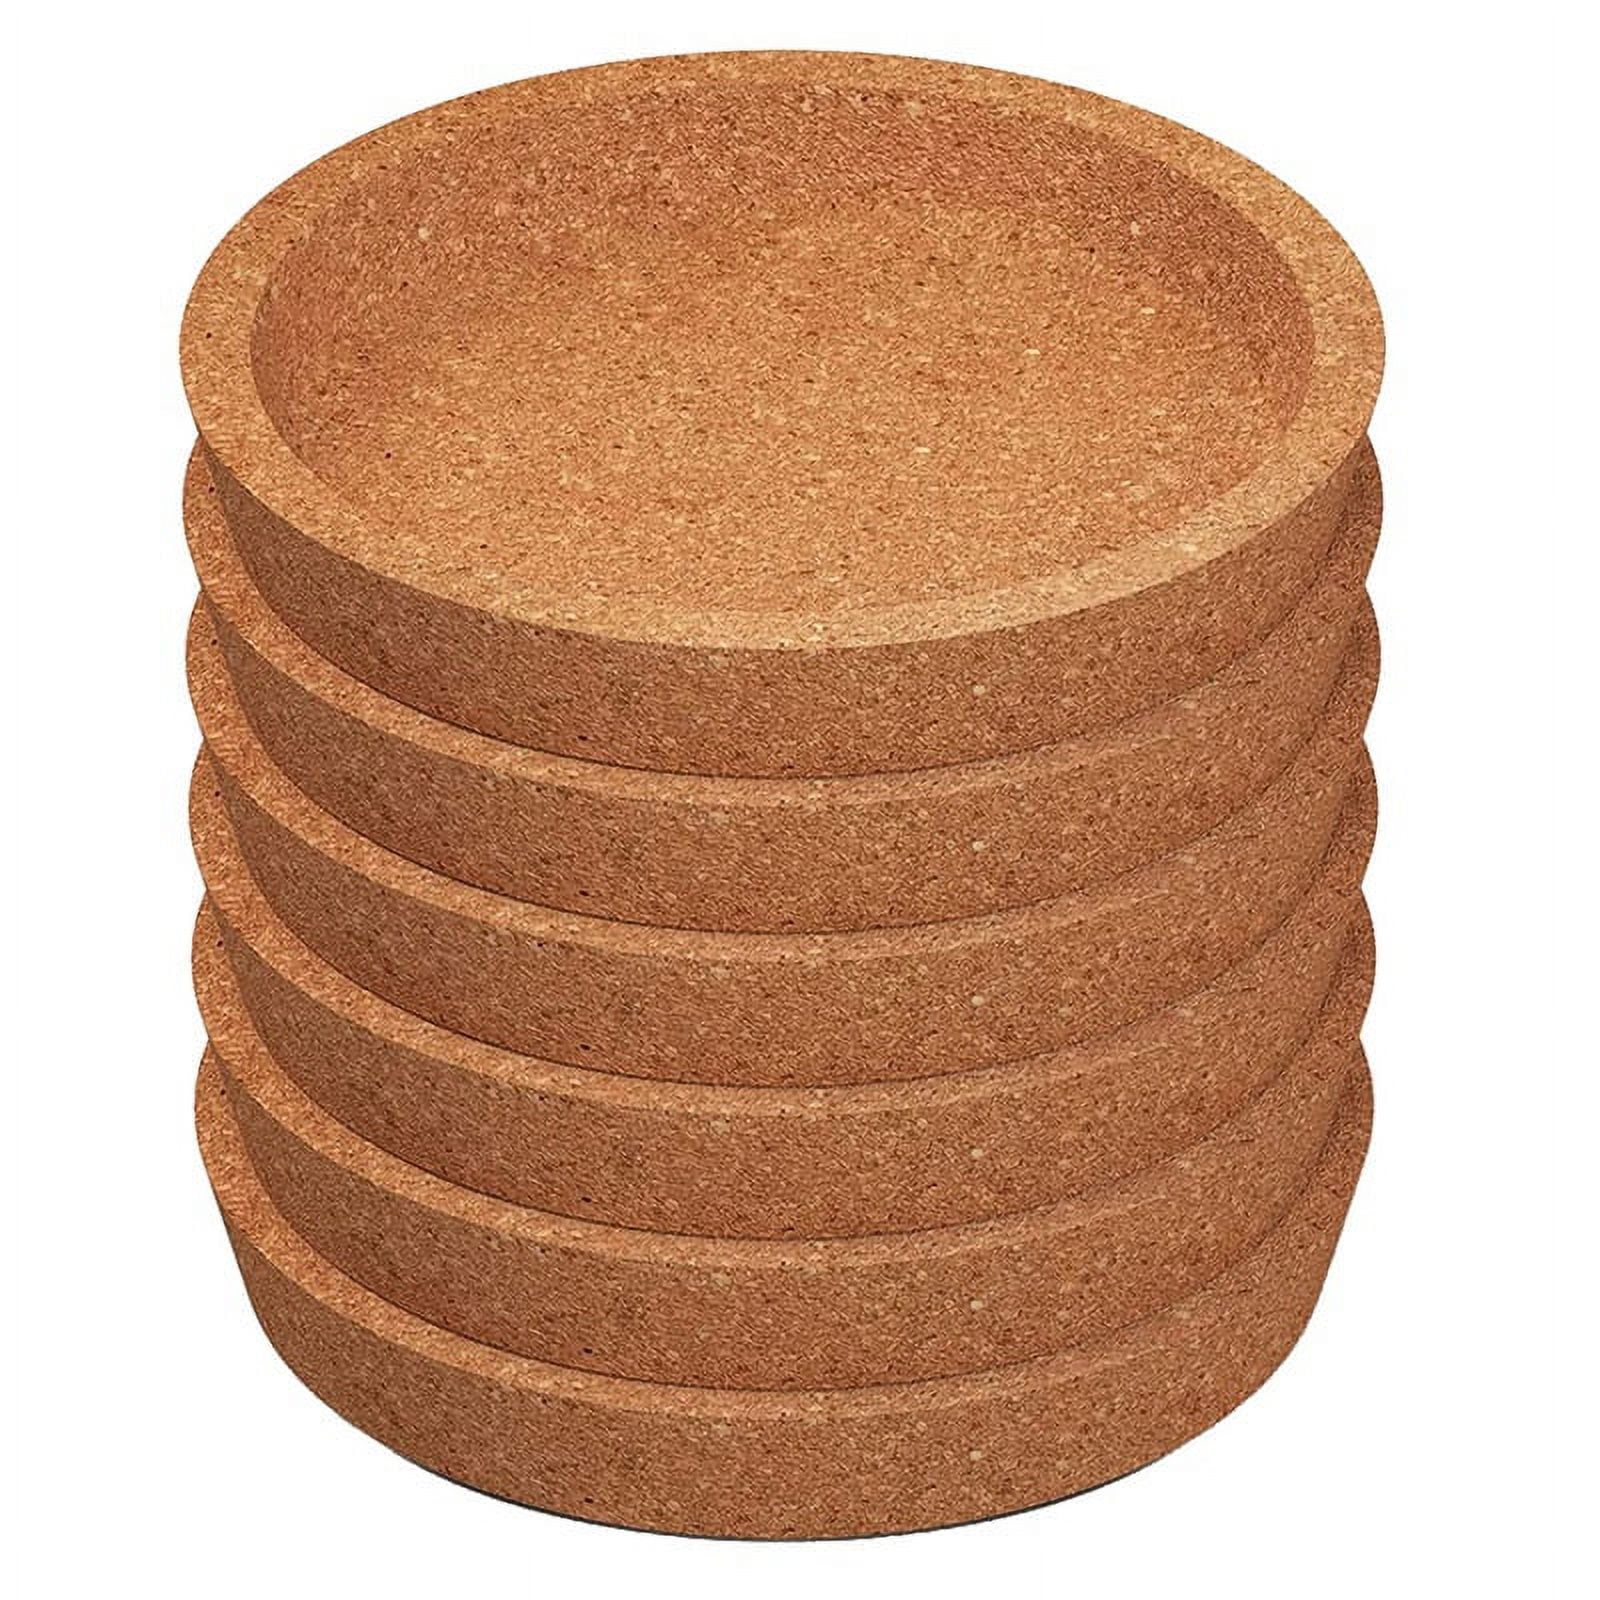 6 Pack Cork Coasters, 4 Inch Absorbent Heat Resistant Round Cork Coasters  for Kind of Mugs in Office or Home 